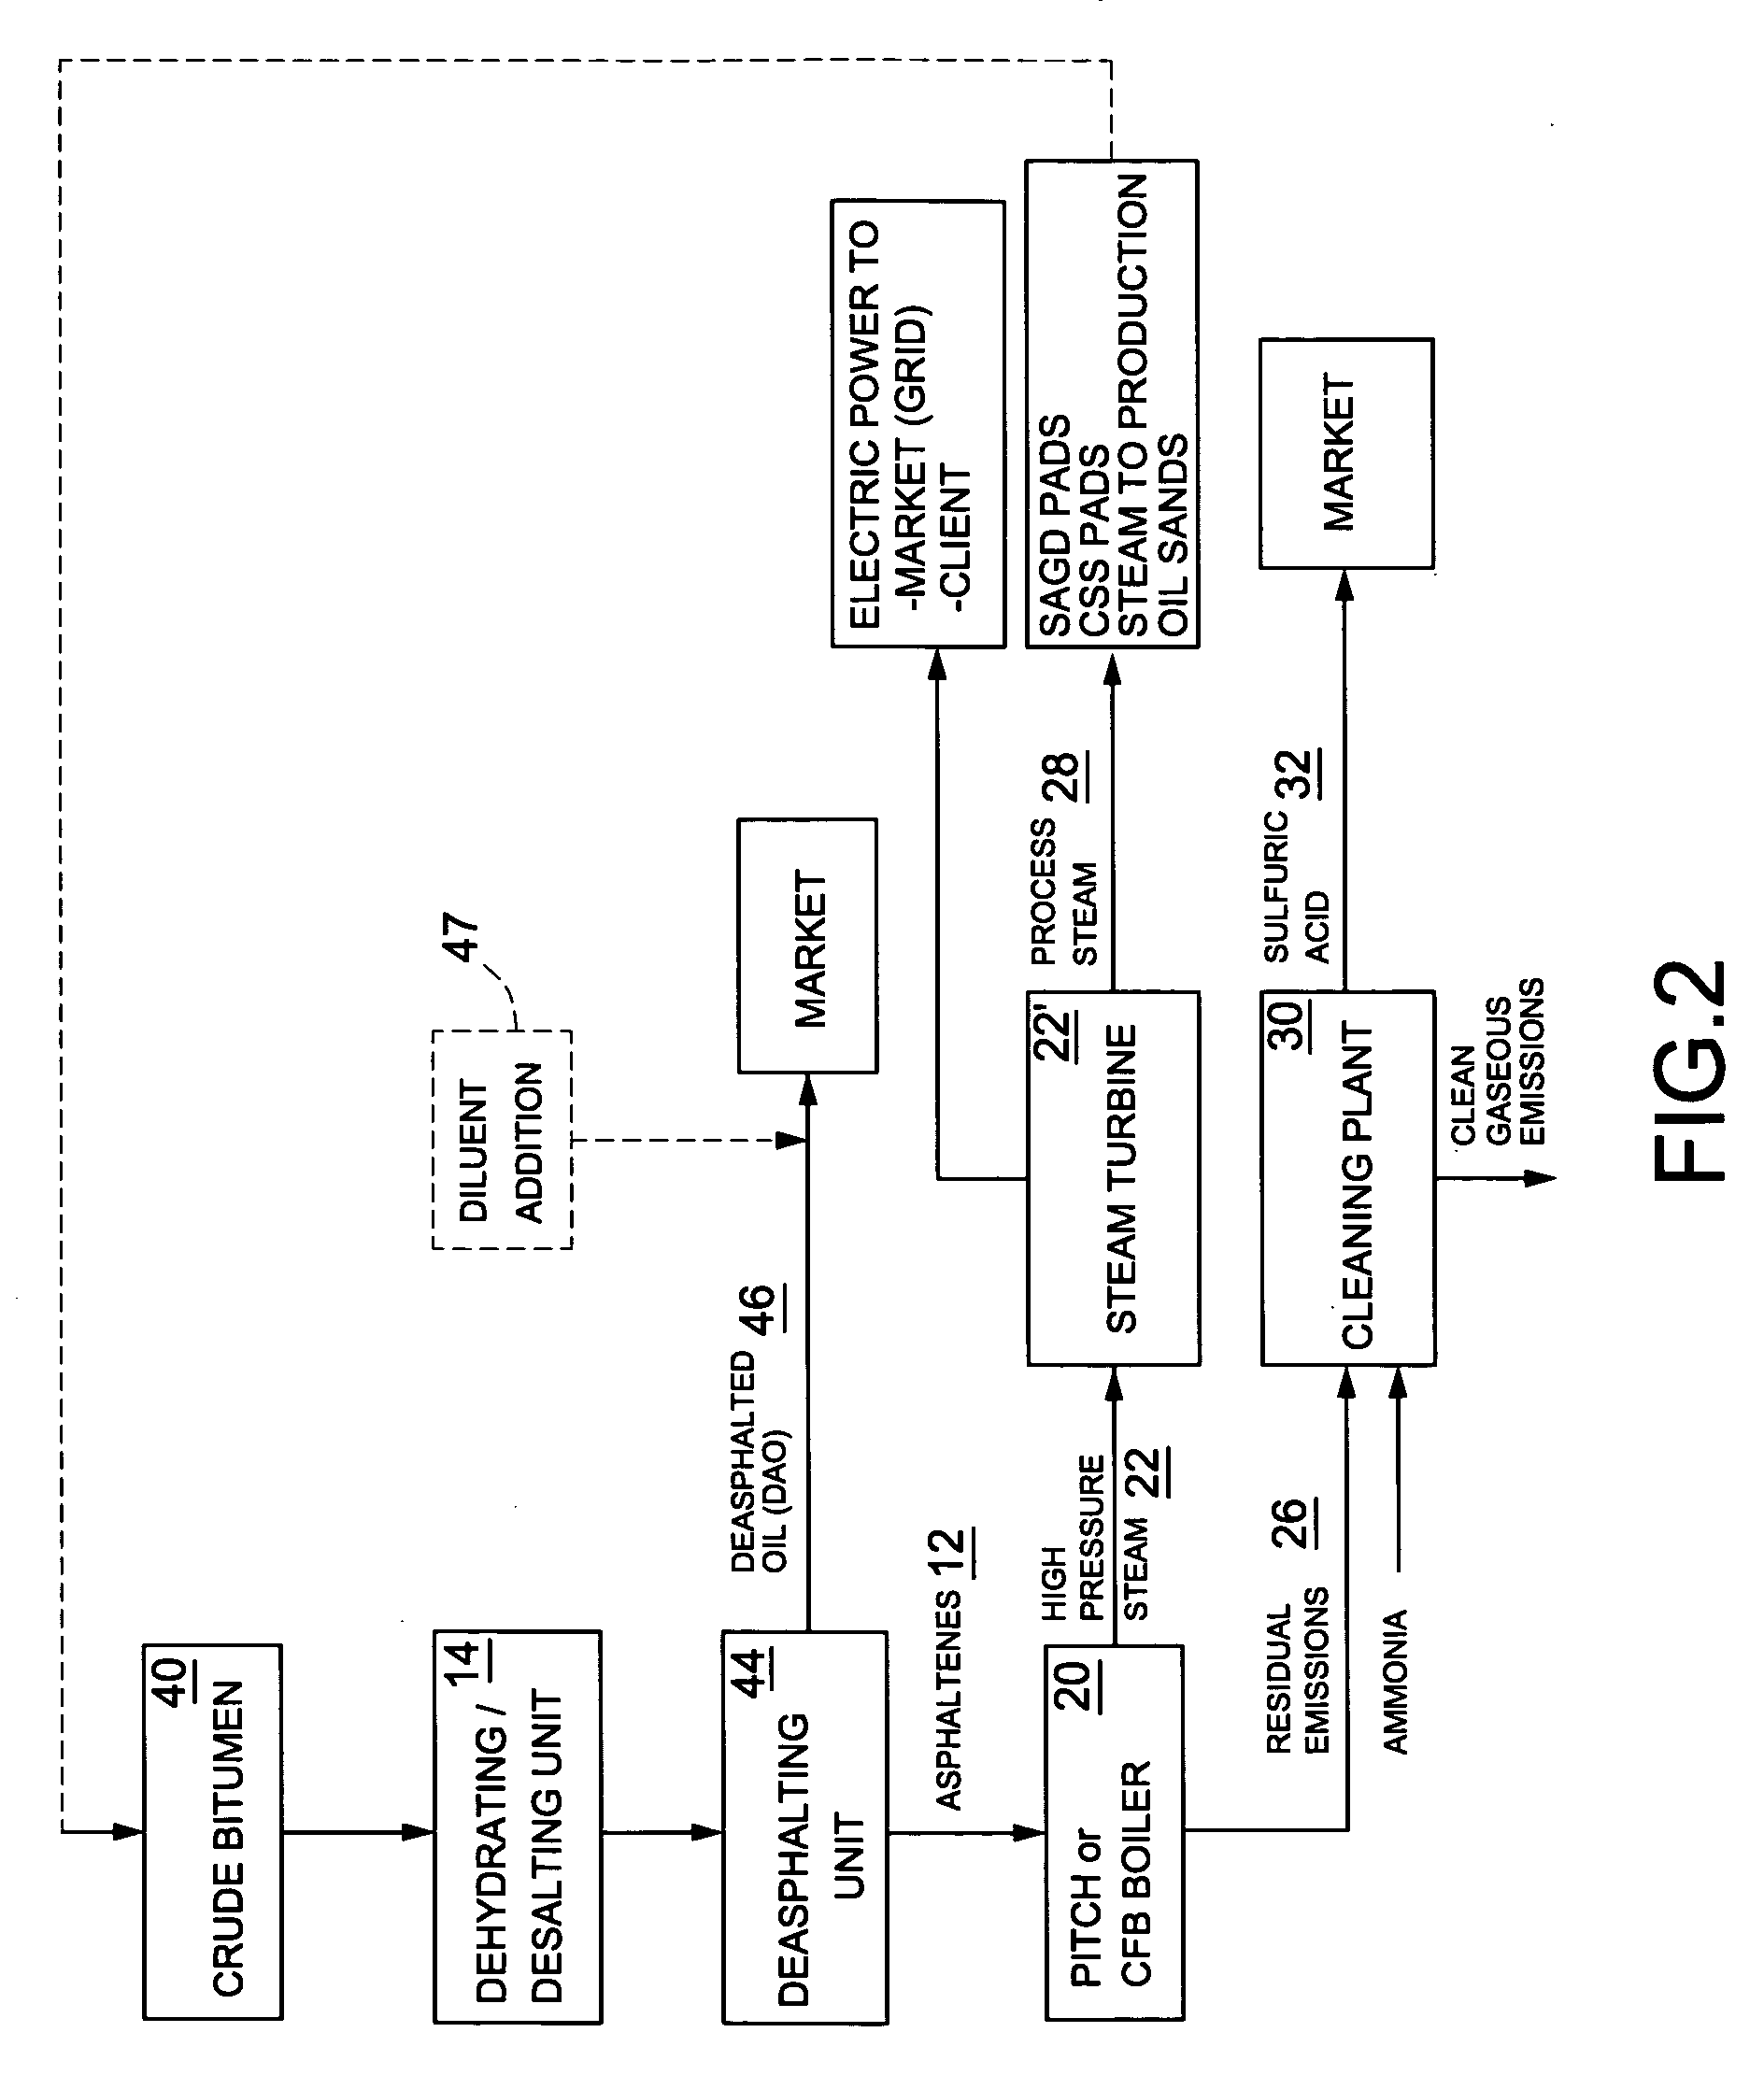 Process for producing steam and/or power from oil residues with high sulfur content